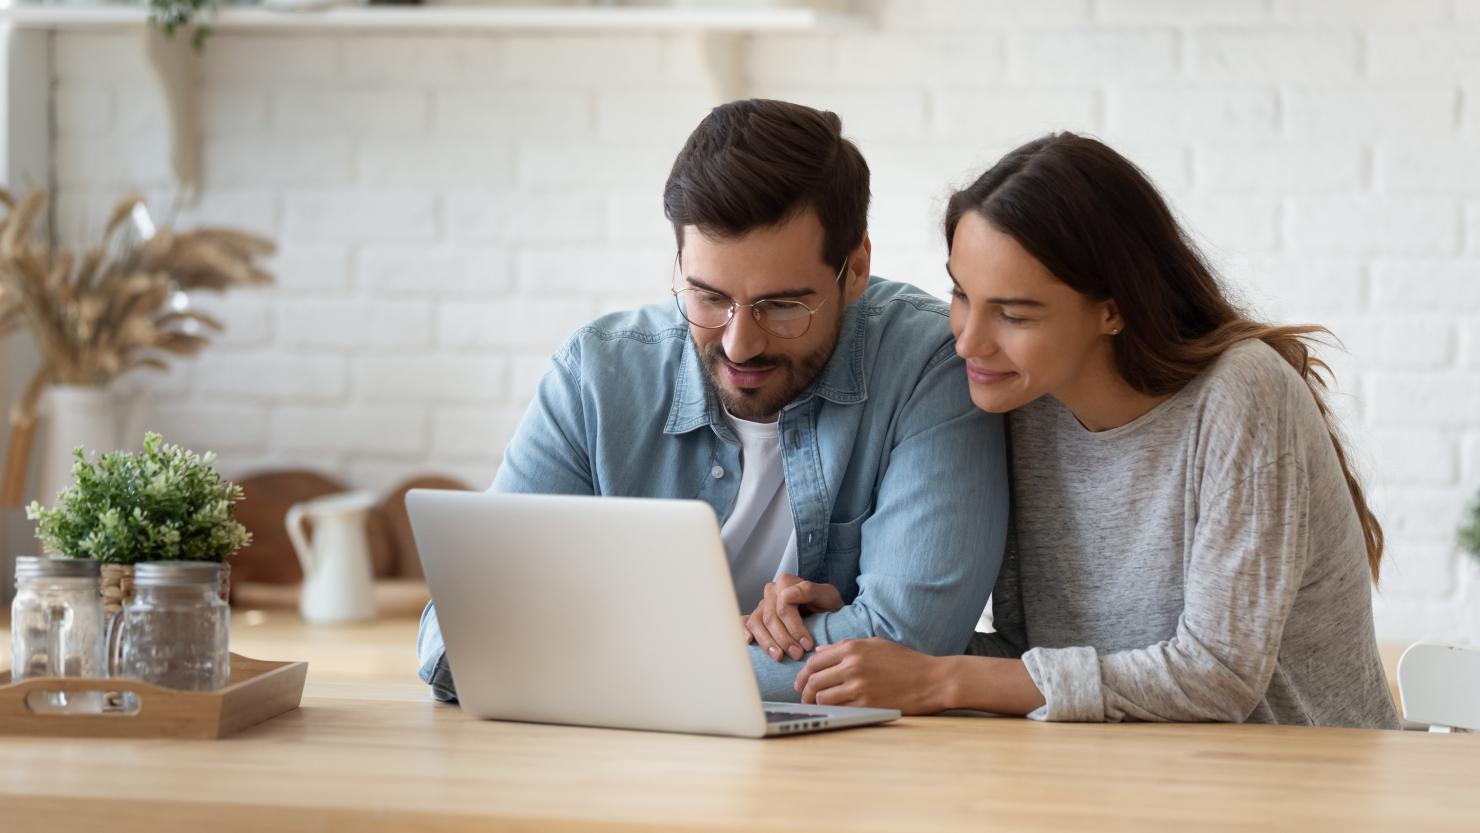 Couple sitting together looking at a laptop